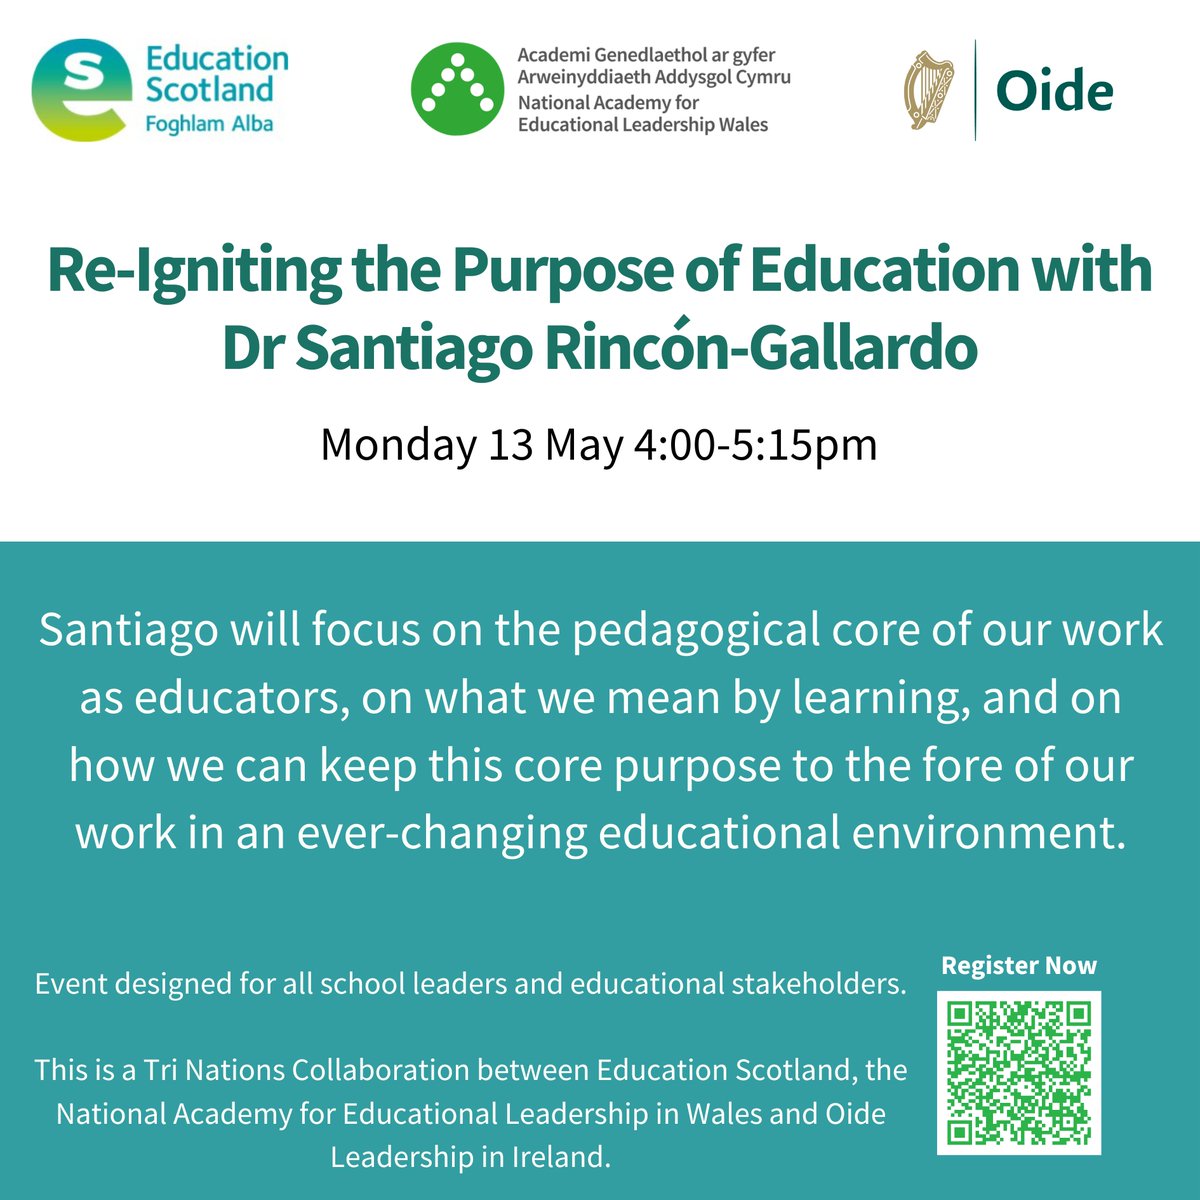 Join the #LeadershipAcademy, @EducationScot and @Oide_Leadership on 13 May for a Tri Nations collaboration event 'Re-Igniting the Purpose of Education with Dr Santiago Rincón-Gallardo' For more information, go to ow.ly/6X4I50R6mVf @WG_Education @SRinconGallardo #TriNations